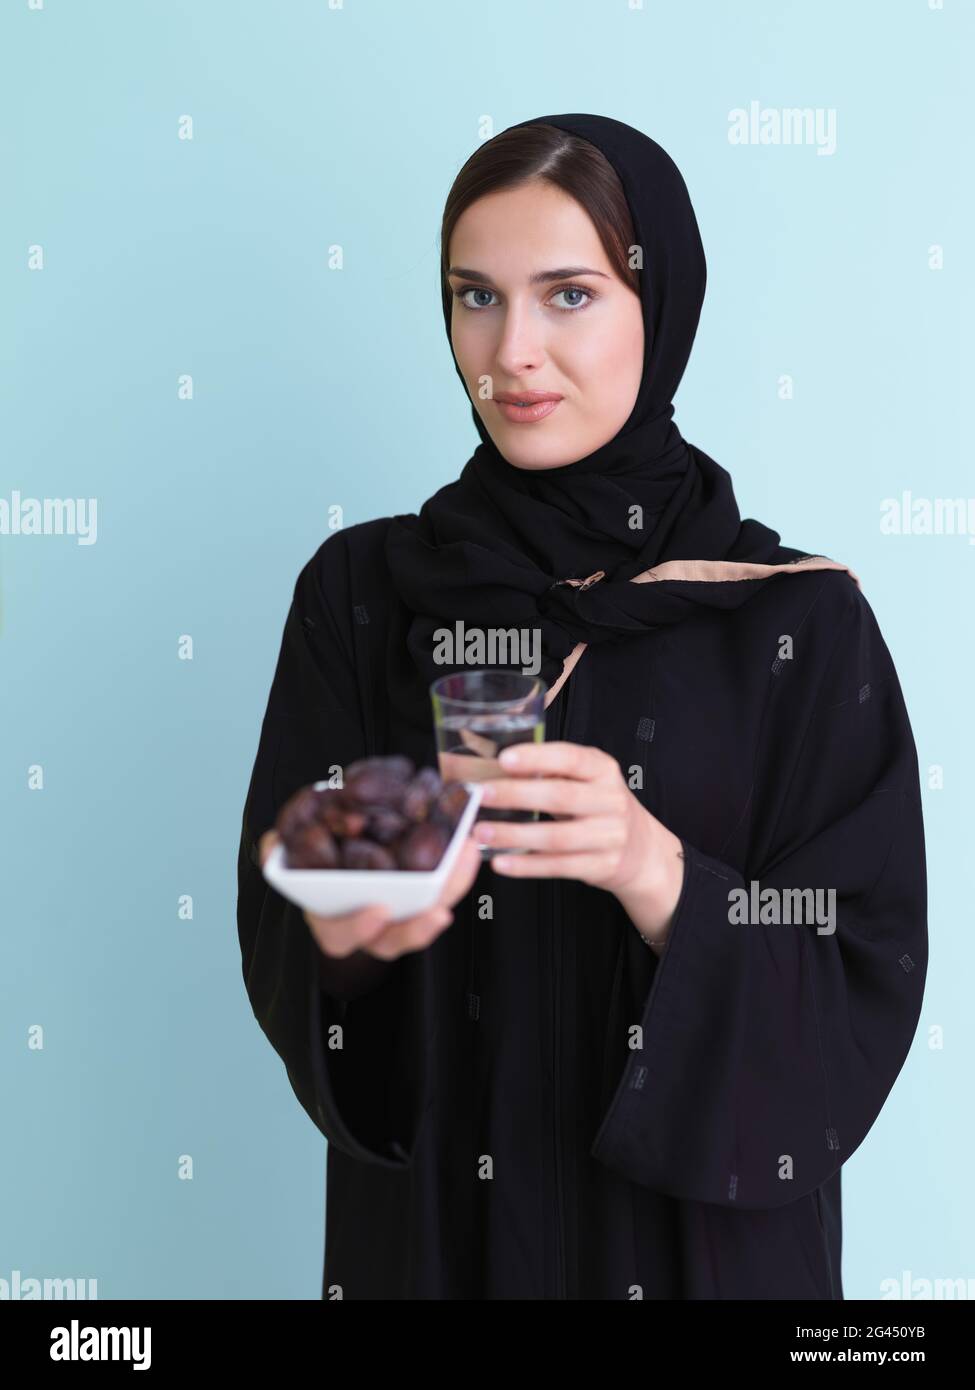 Modern muslim woman in abaya holding a date fruit and glass of water in front of her Stock Photo